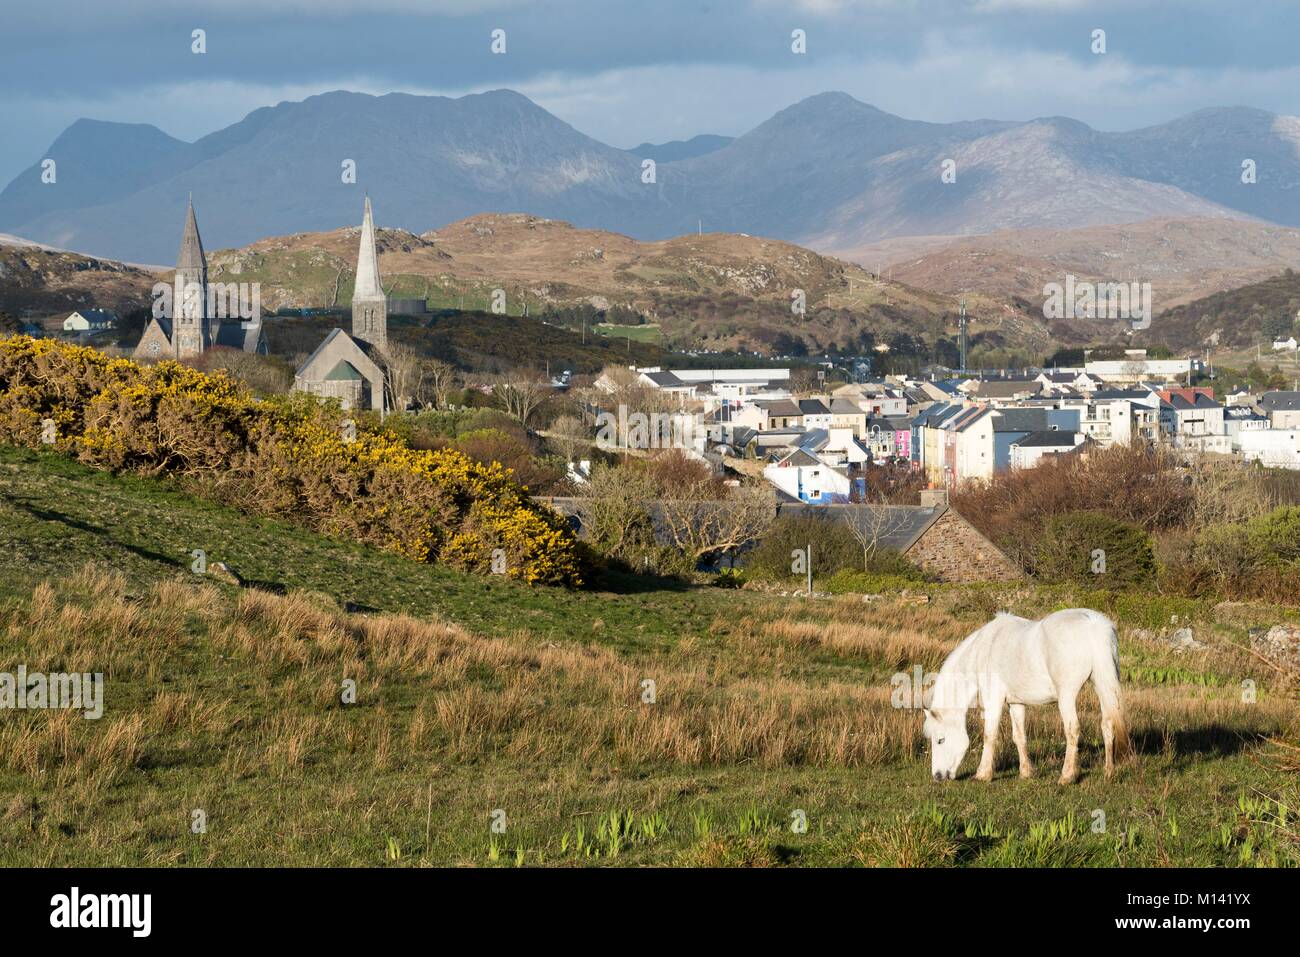 Ireland, County Galway, Clifden, Connemara, Clifden Town and the Twelve Bens in the background Stock Photo